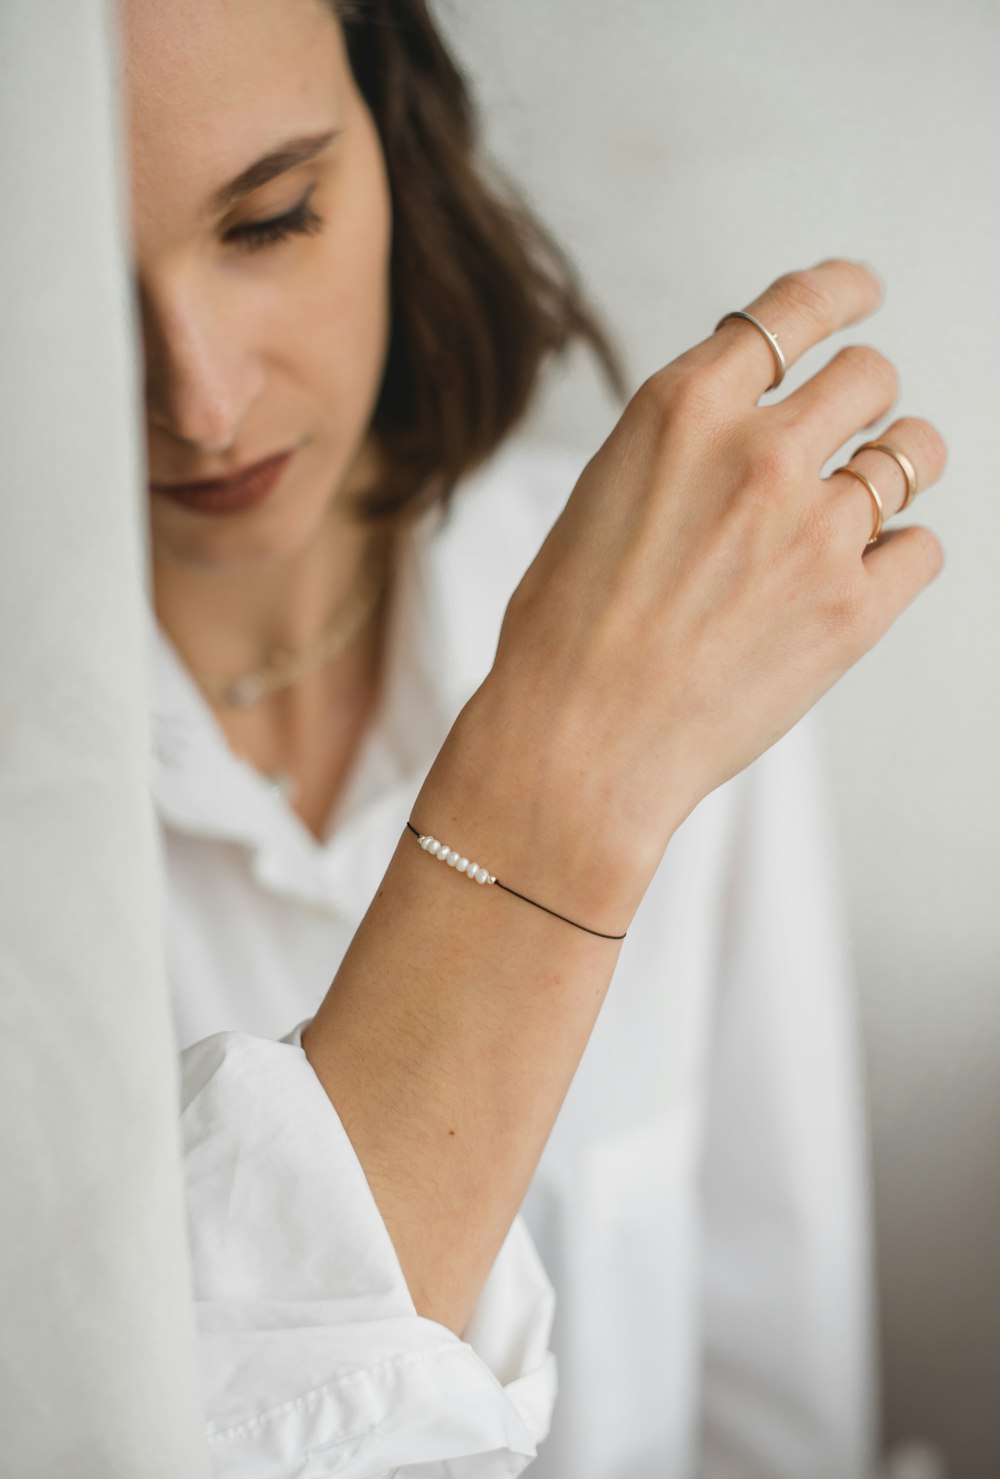 a woman wearing a gold bracelet and a white shirt